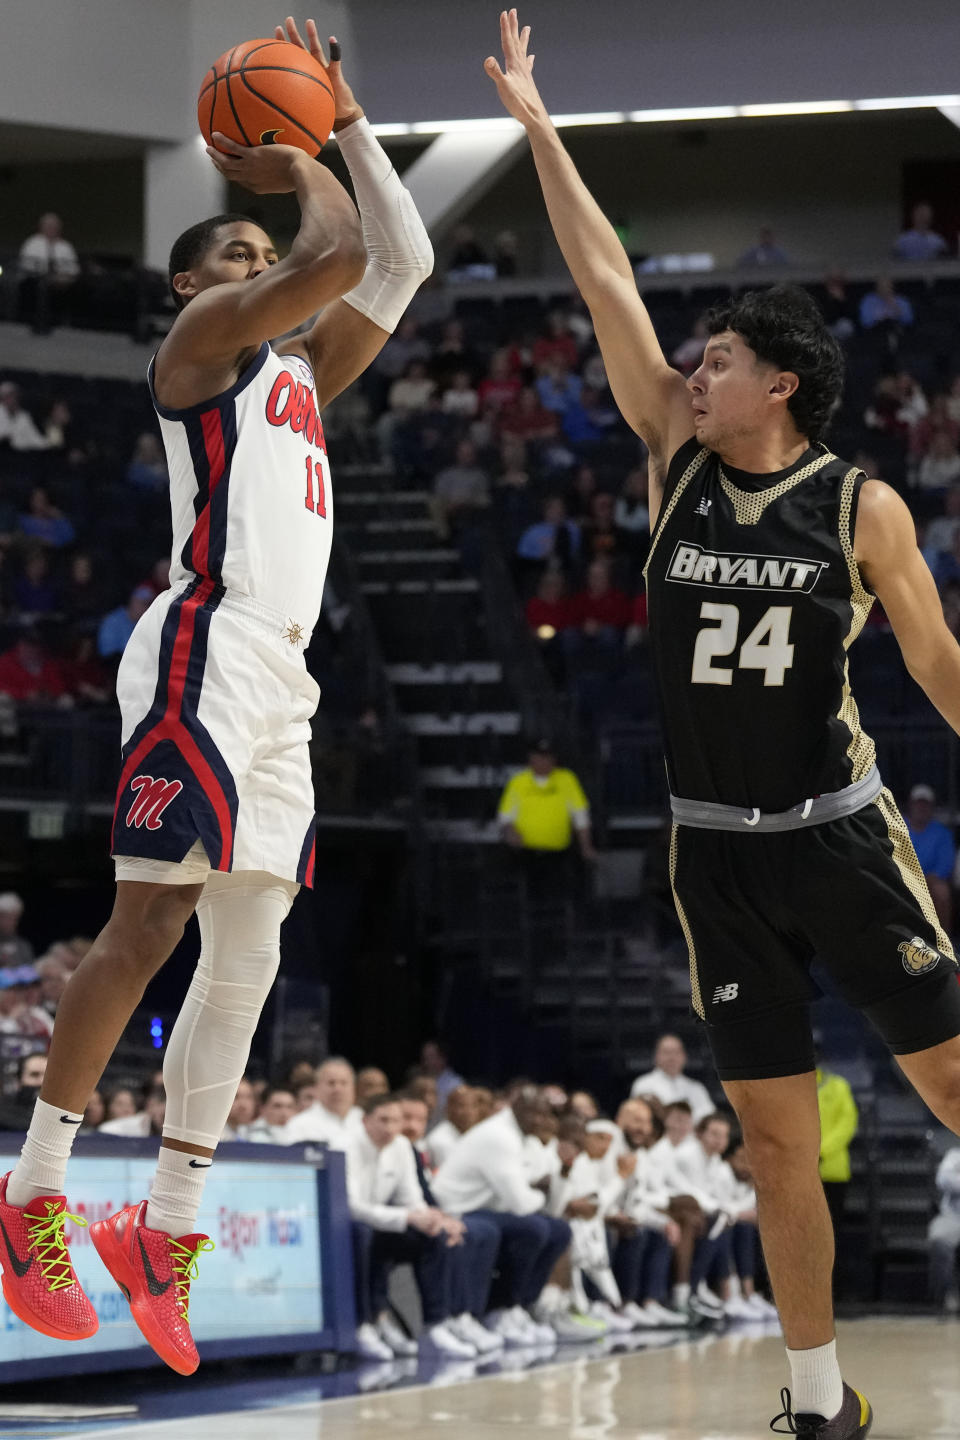 Mississippi guard Matthew Murrell (11) shoots over the defense of Bryant University guard Rafael Pinzon (24) during the first half of an NCAA college basketball game, Sunday, Dec. 31, 2023, in Oxford, Miss. (AP Photo/Rogelio V. Solis)